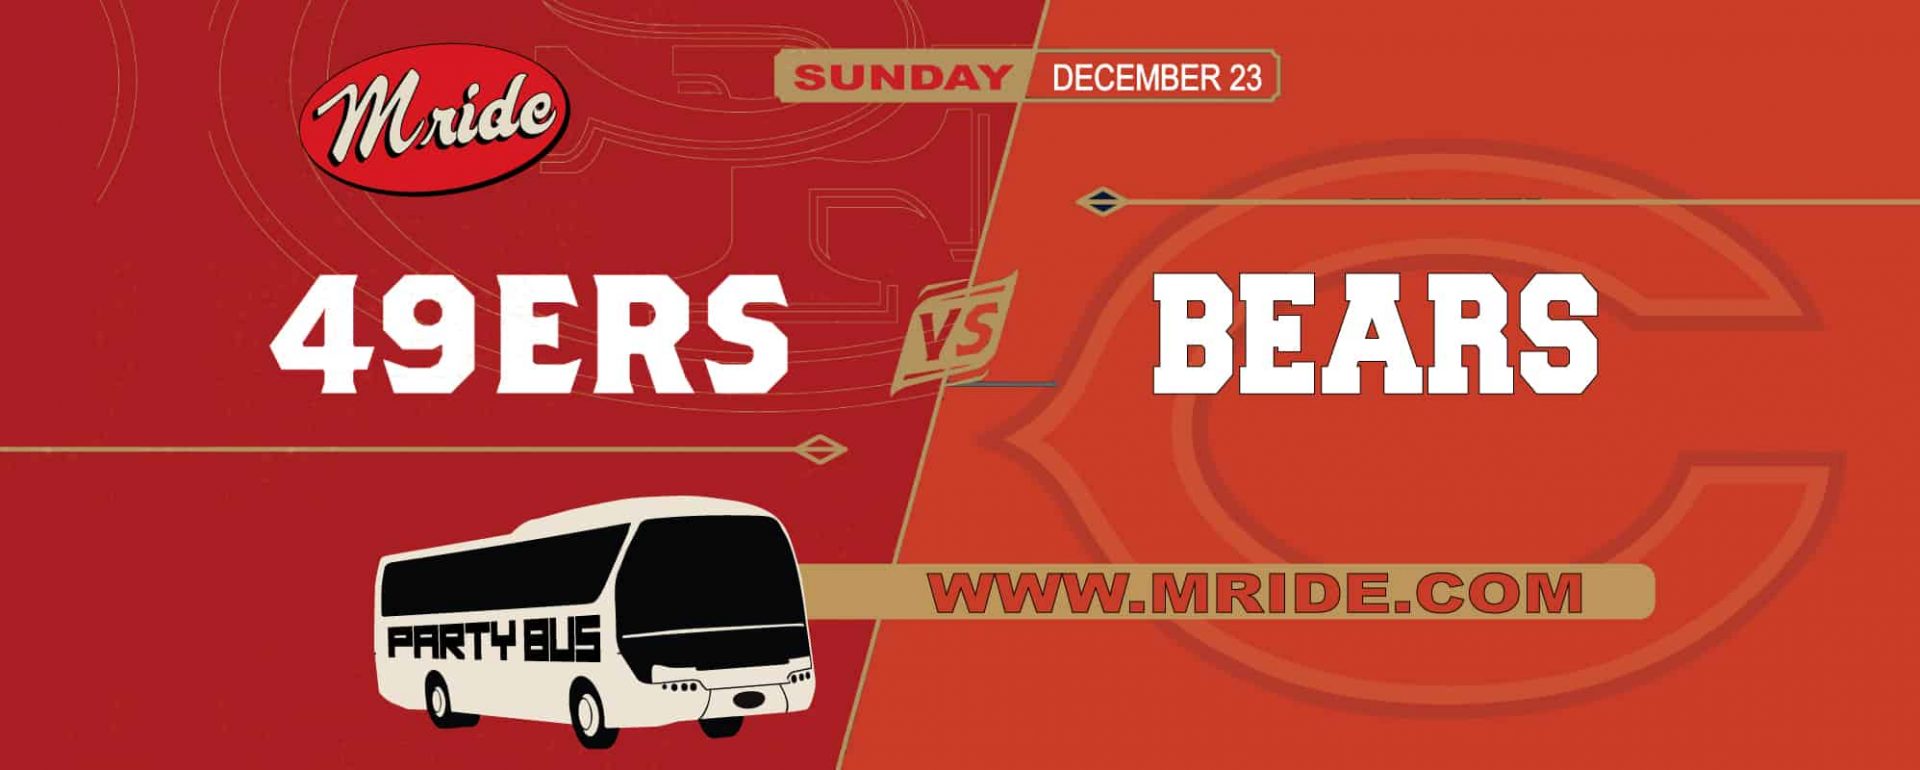 49ers vs. Bears Party Bus